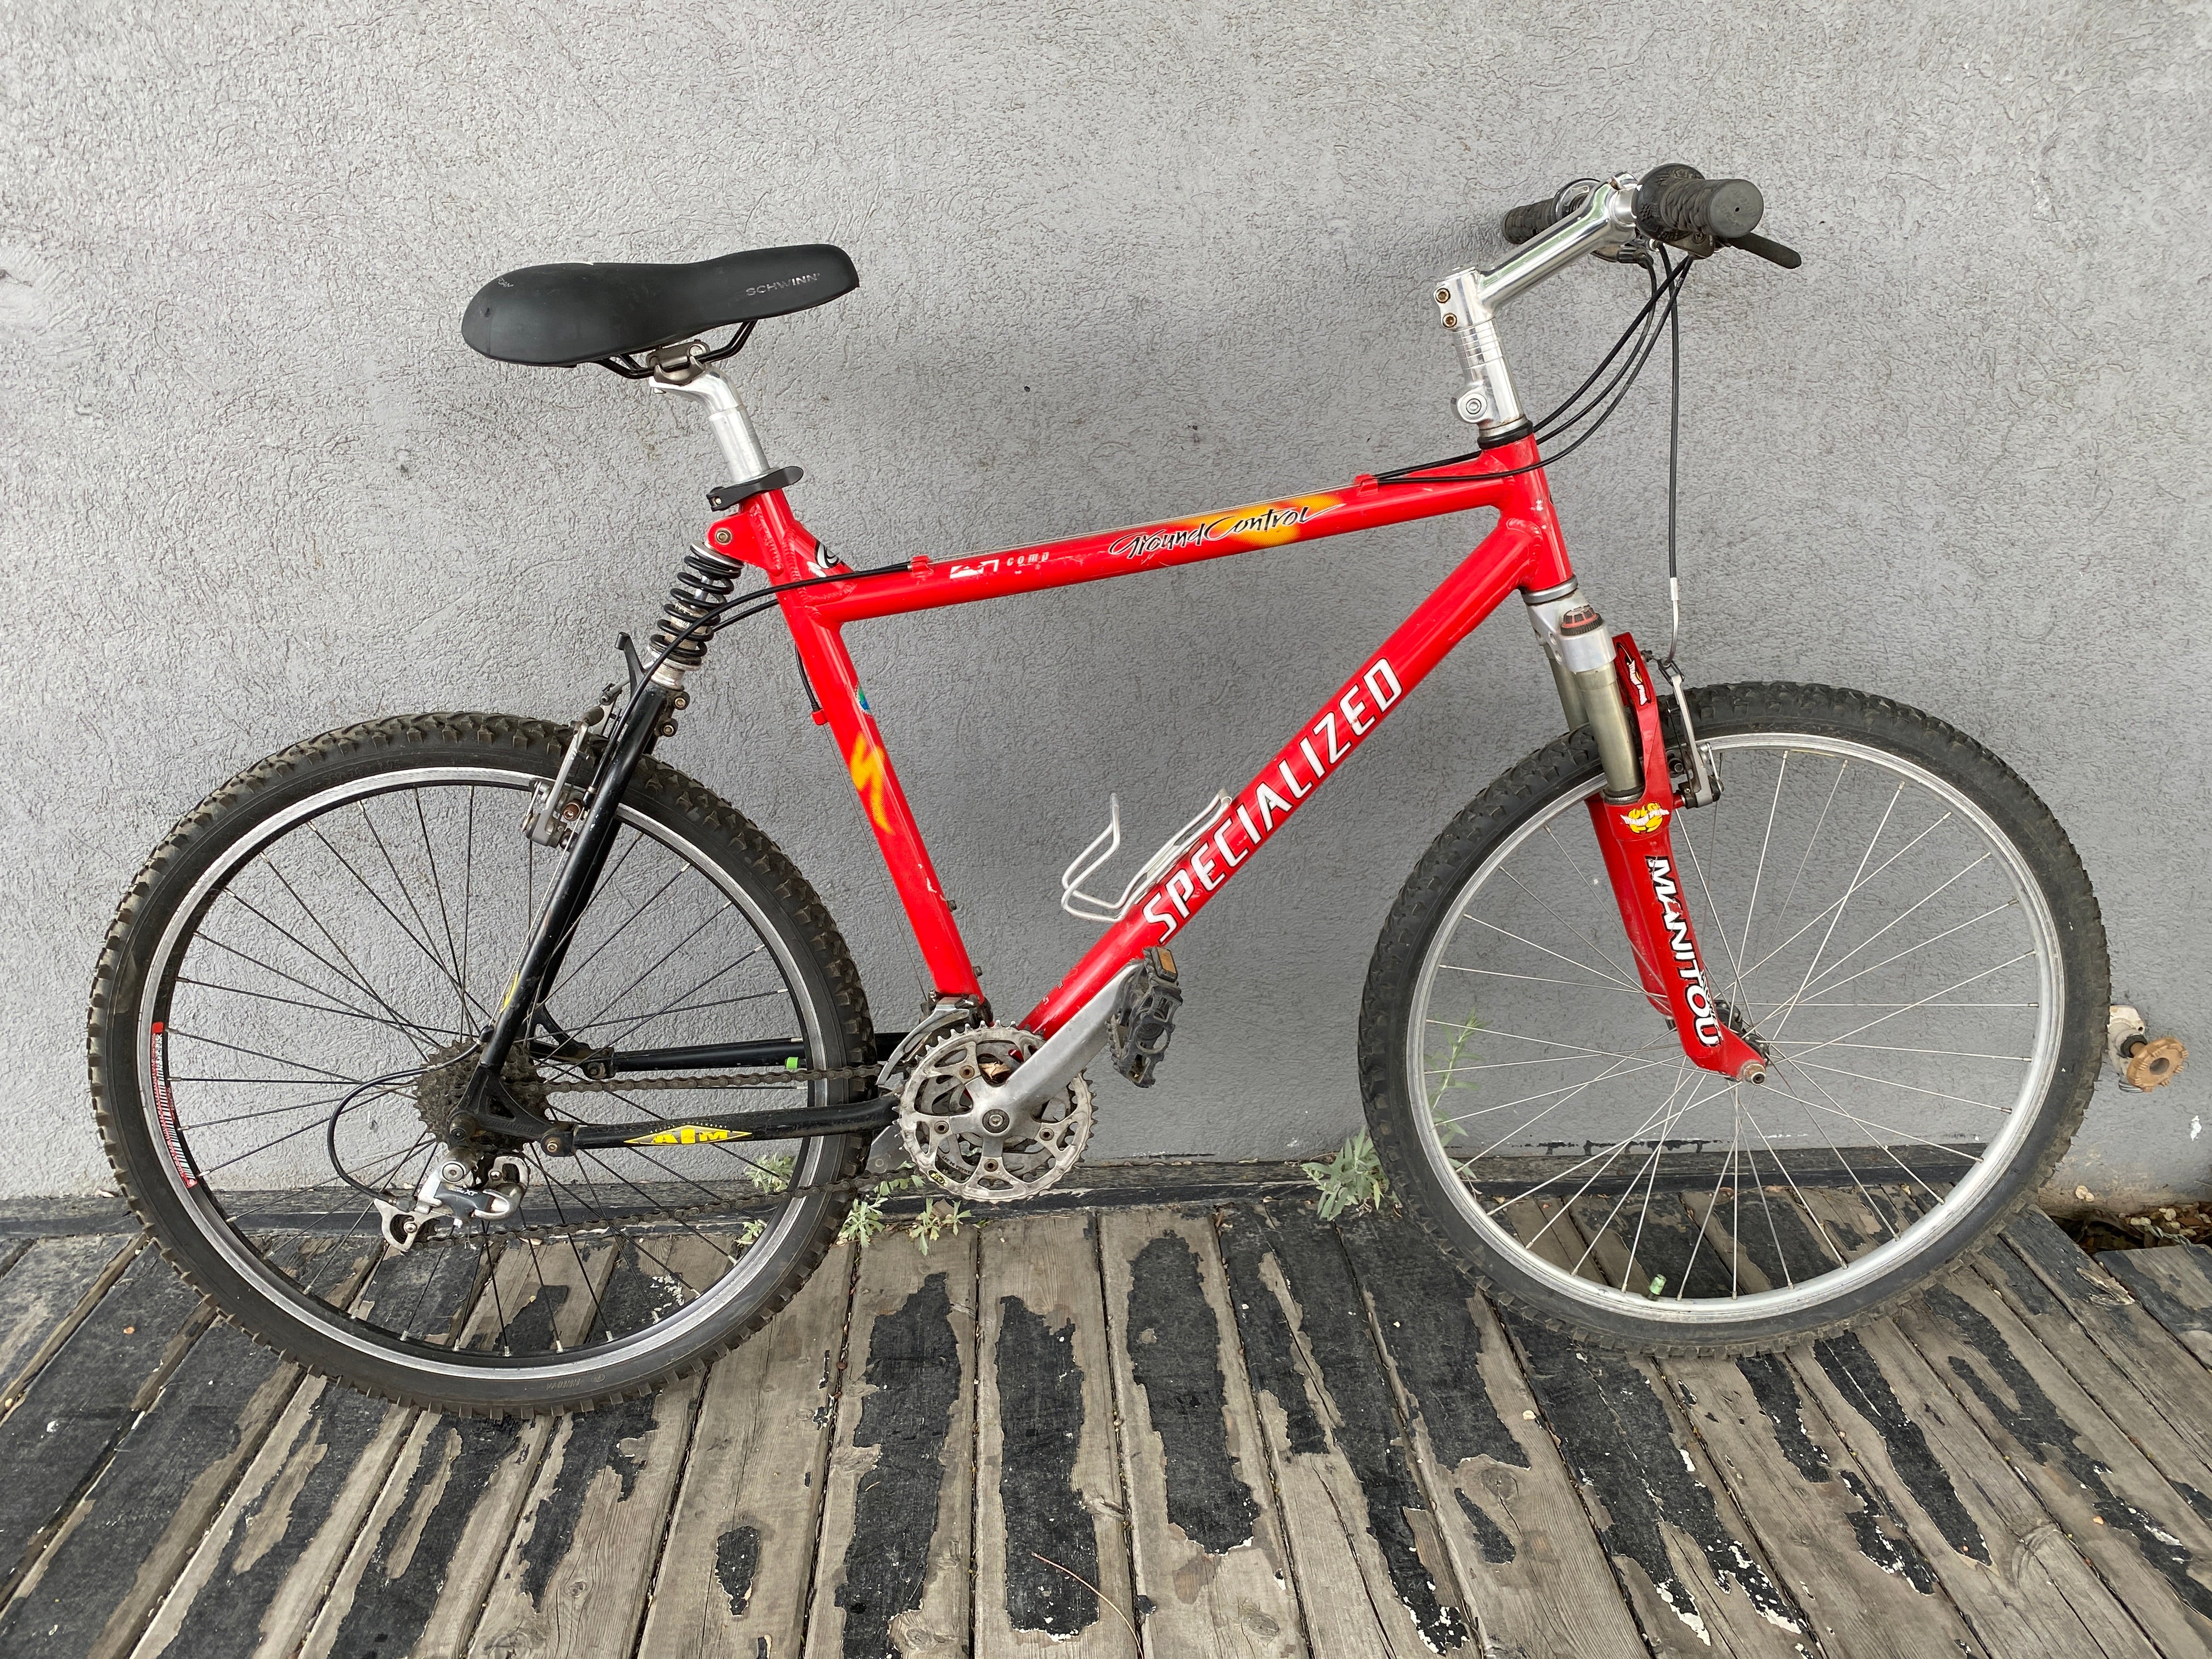 1996 specialized ground control A1 - 自転車本体